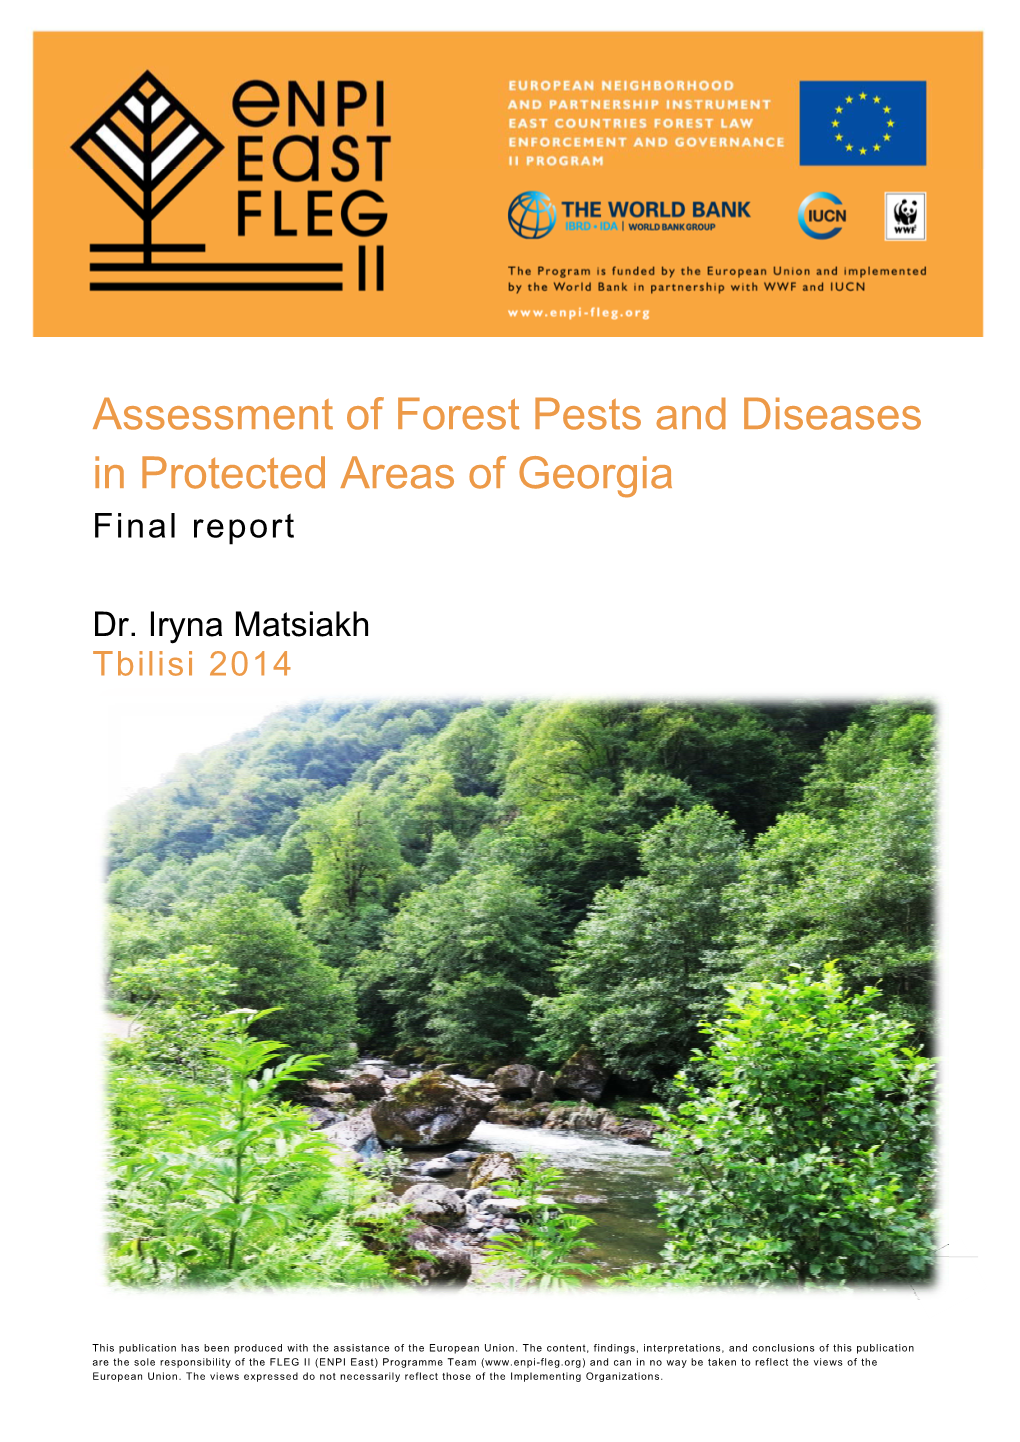 Assessment of Forest Pests and Diseases in Protected Areas of Georgia Final Report